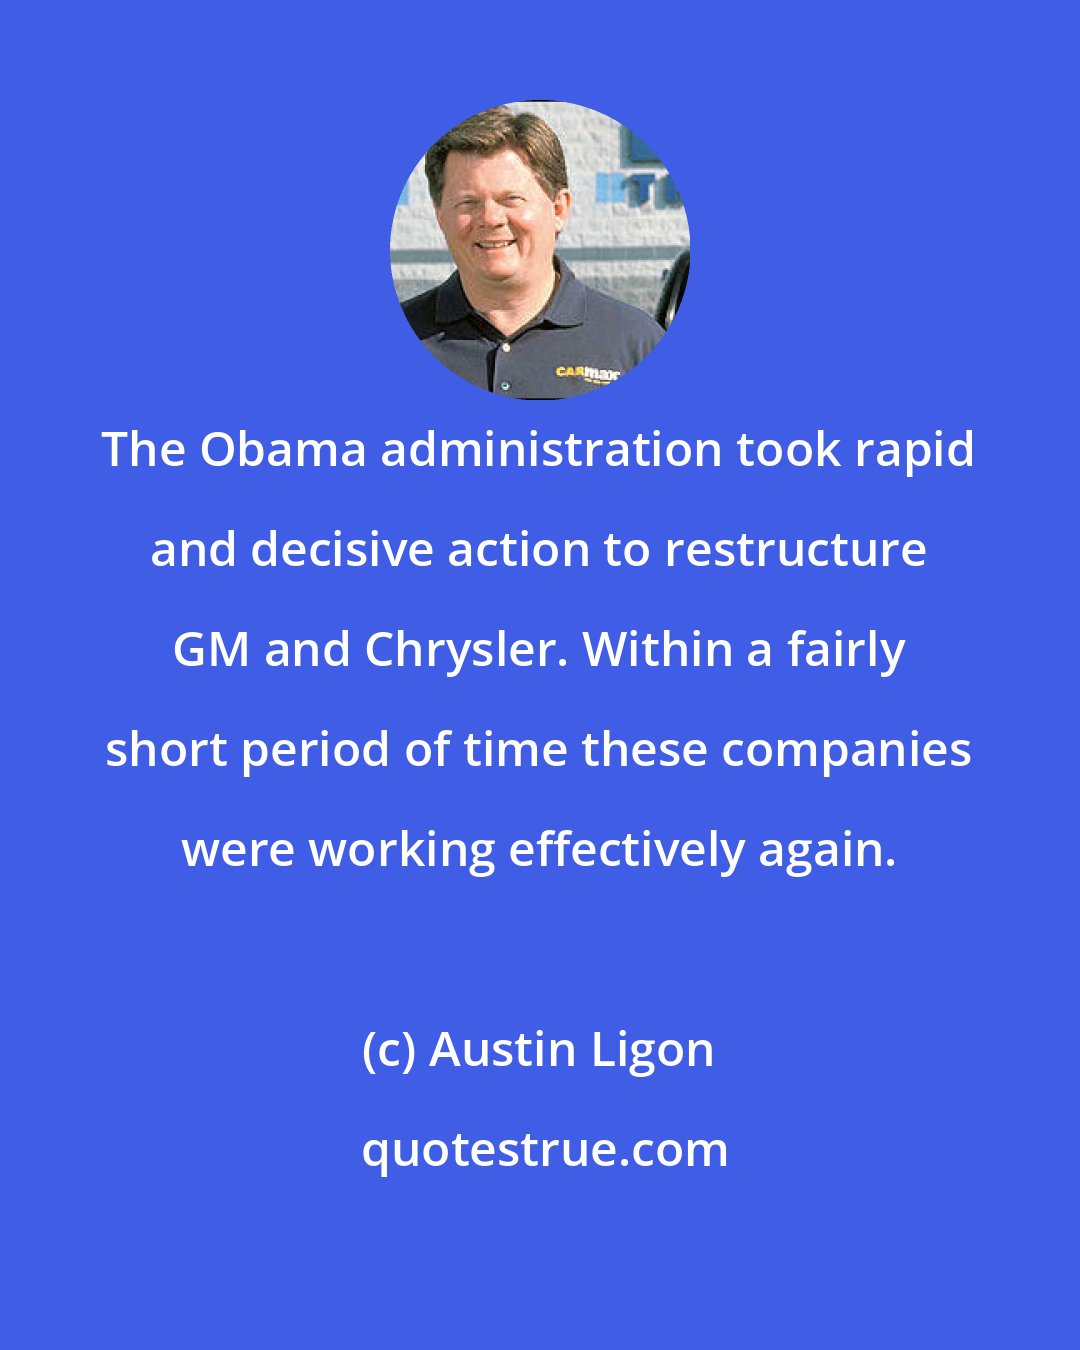 Austin Ligon: The Obama administration took rapid and decisive action to restructure GM and Chrysler. Within a fairly short period of time these companies were working effectively again.